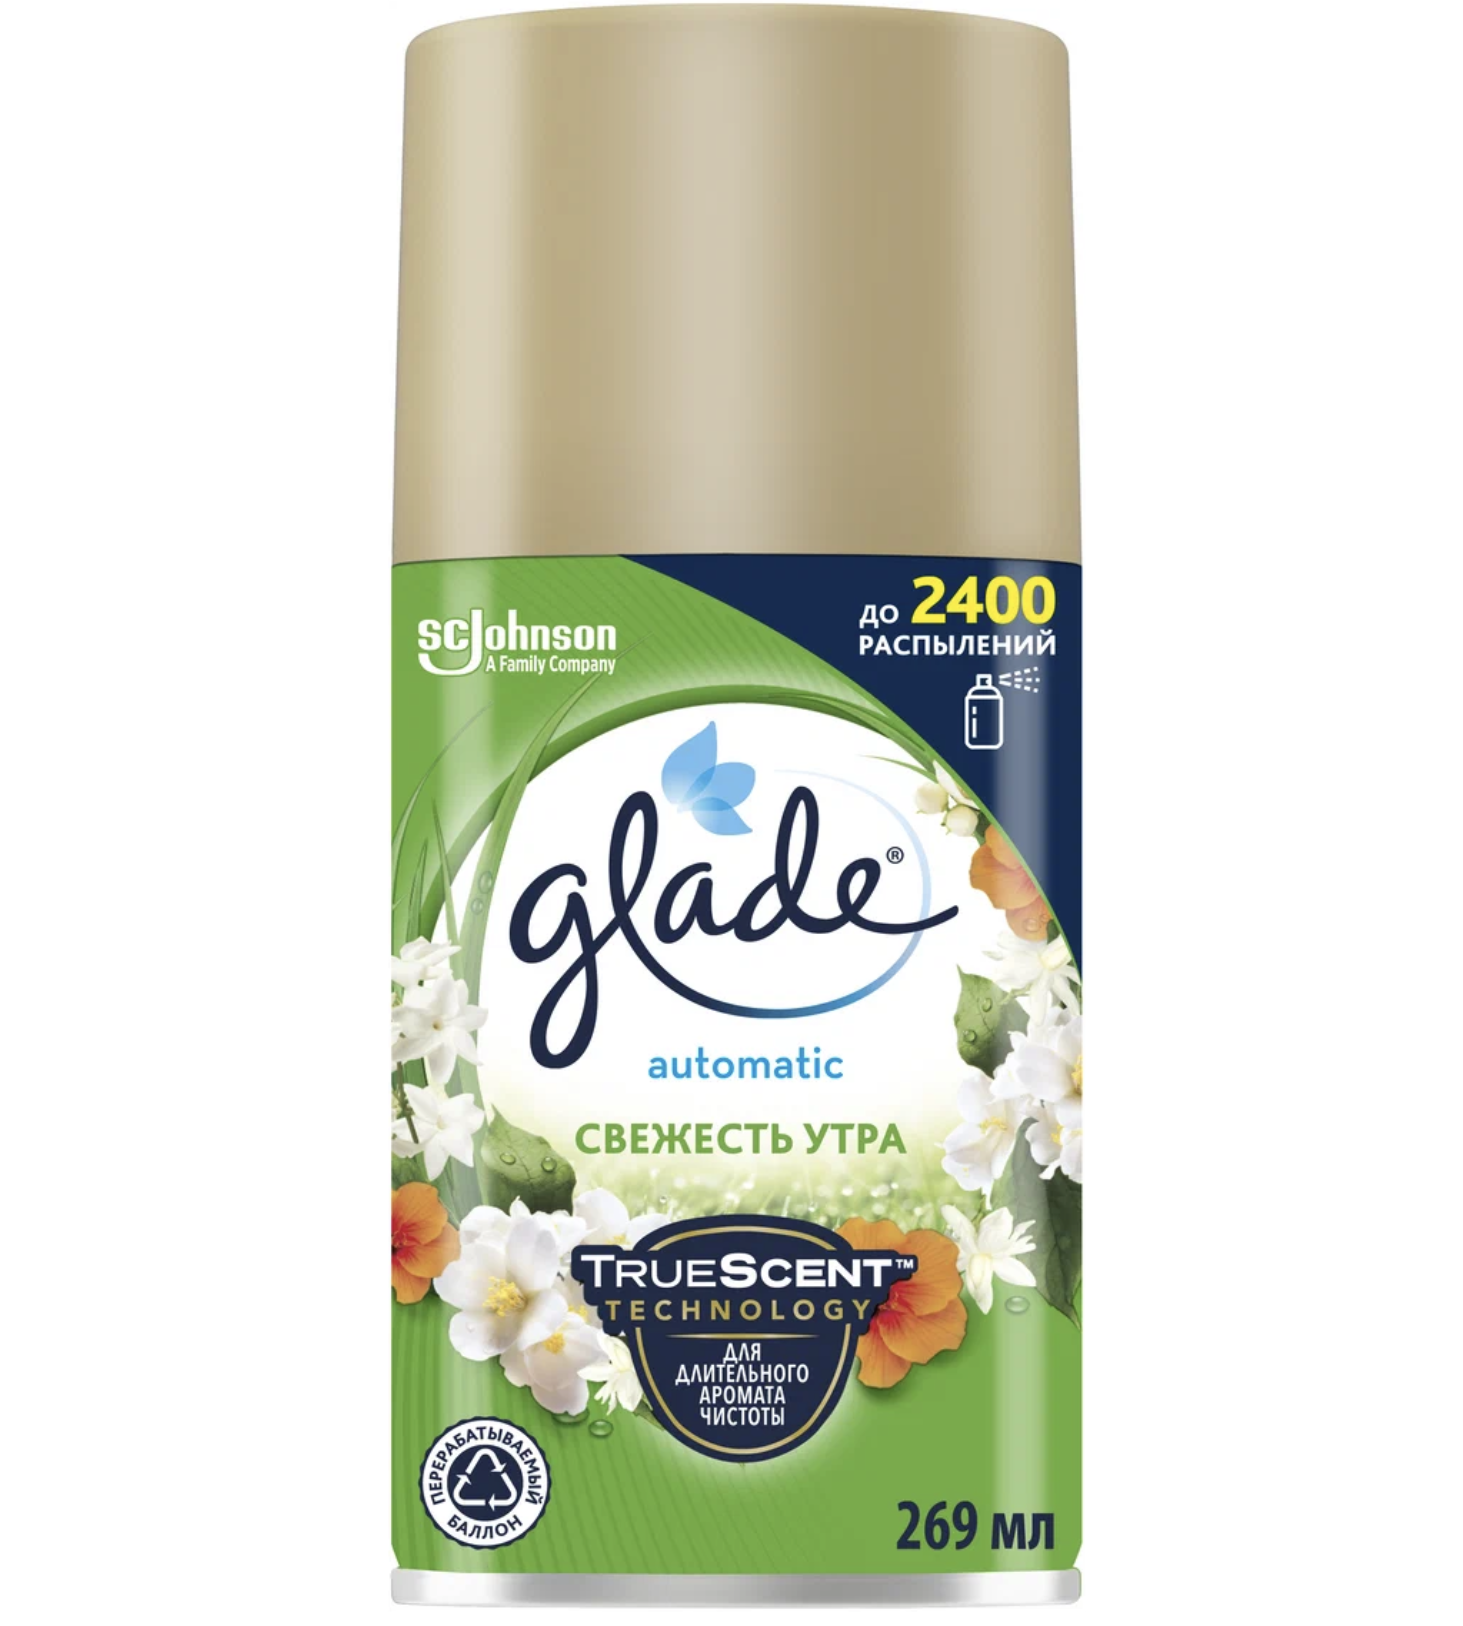   / Glade Automatic   -  , 269 